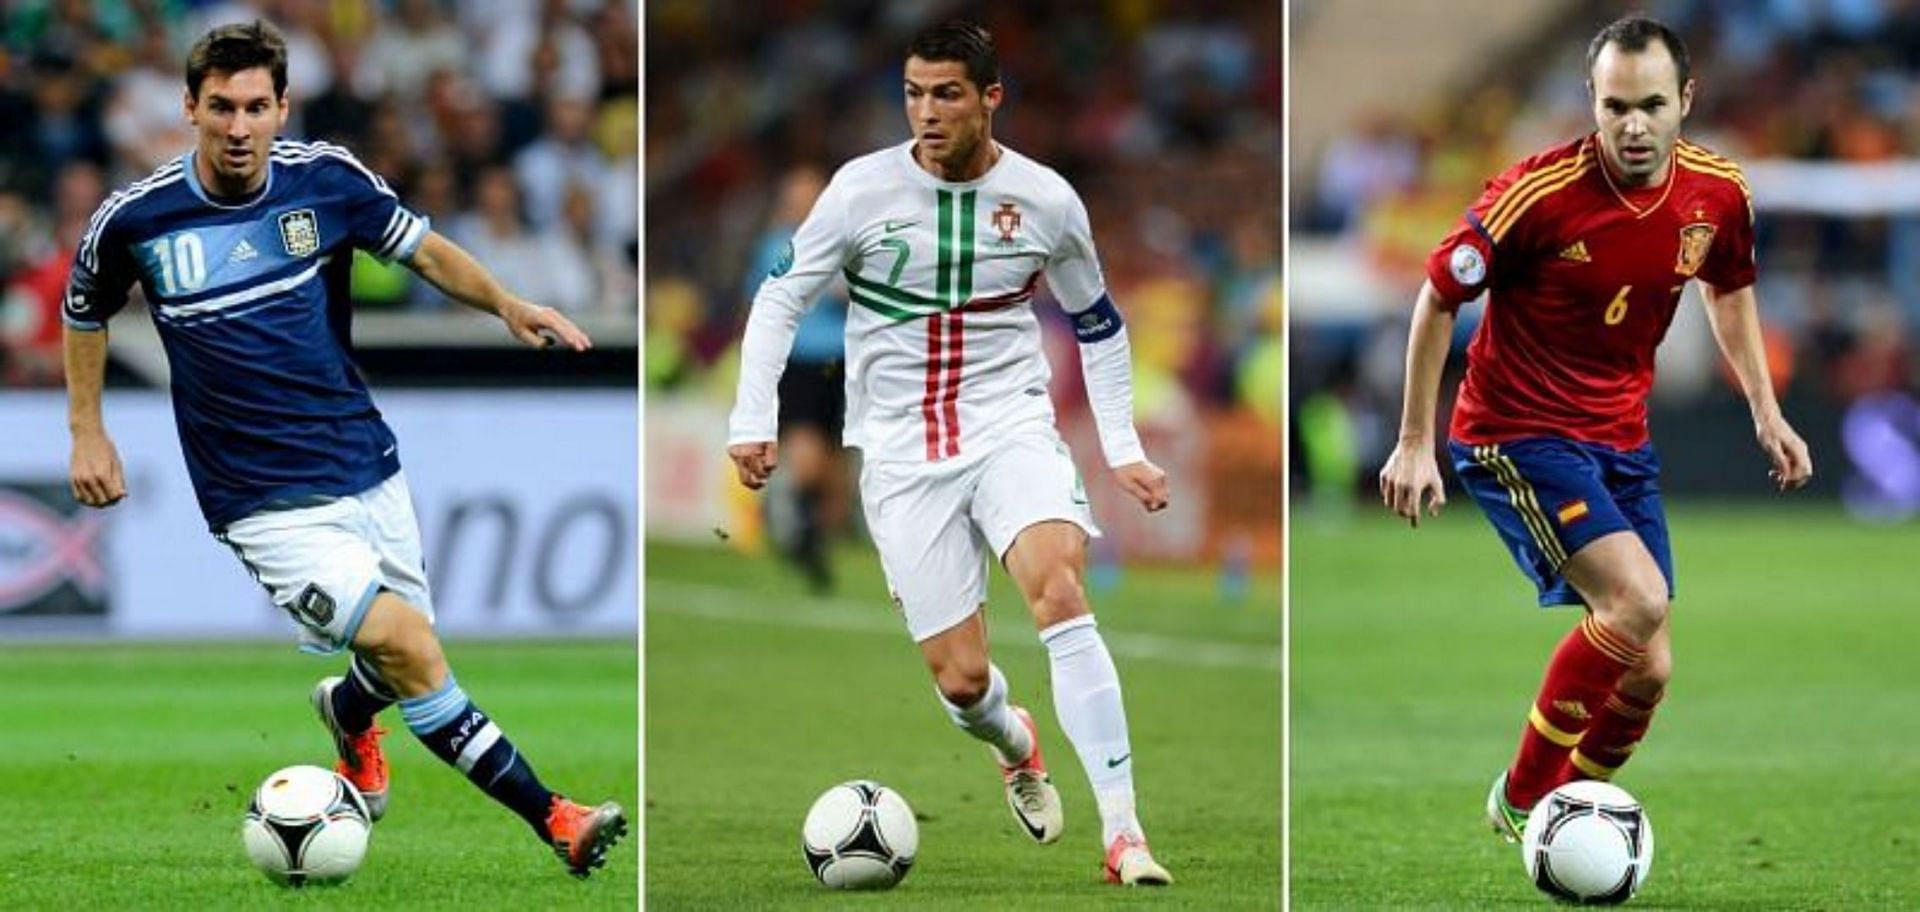 Lionel Messi, Cristiano Ronaldo and Andres Iniesta are some of the best dtibblers of this generation.